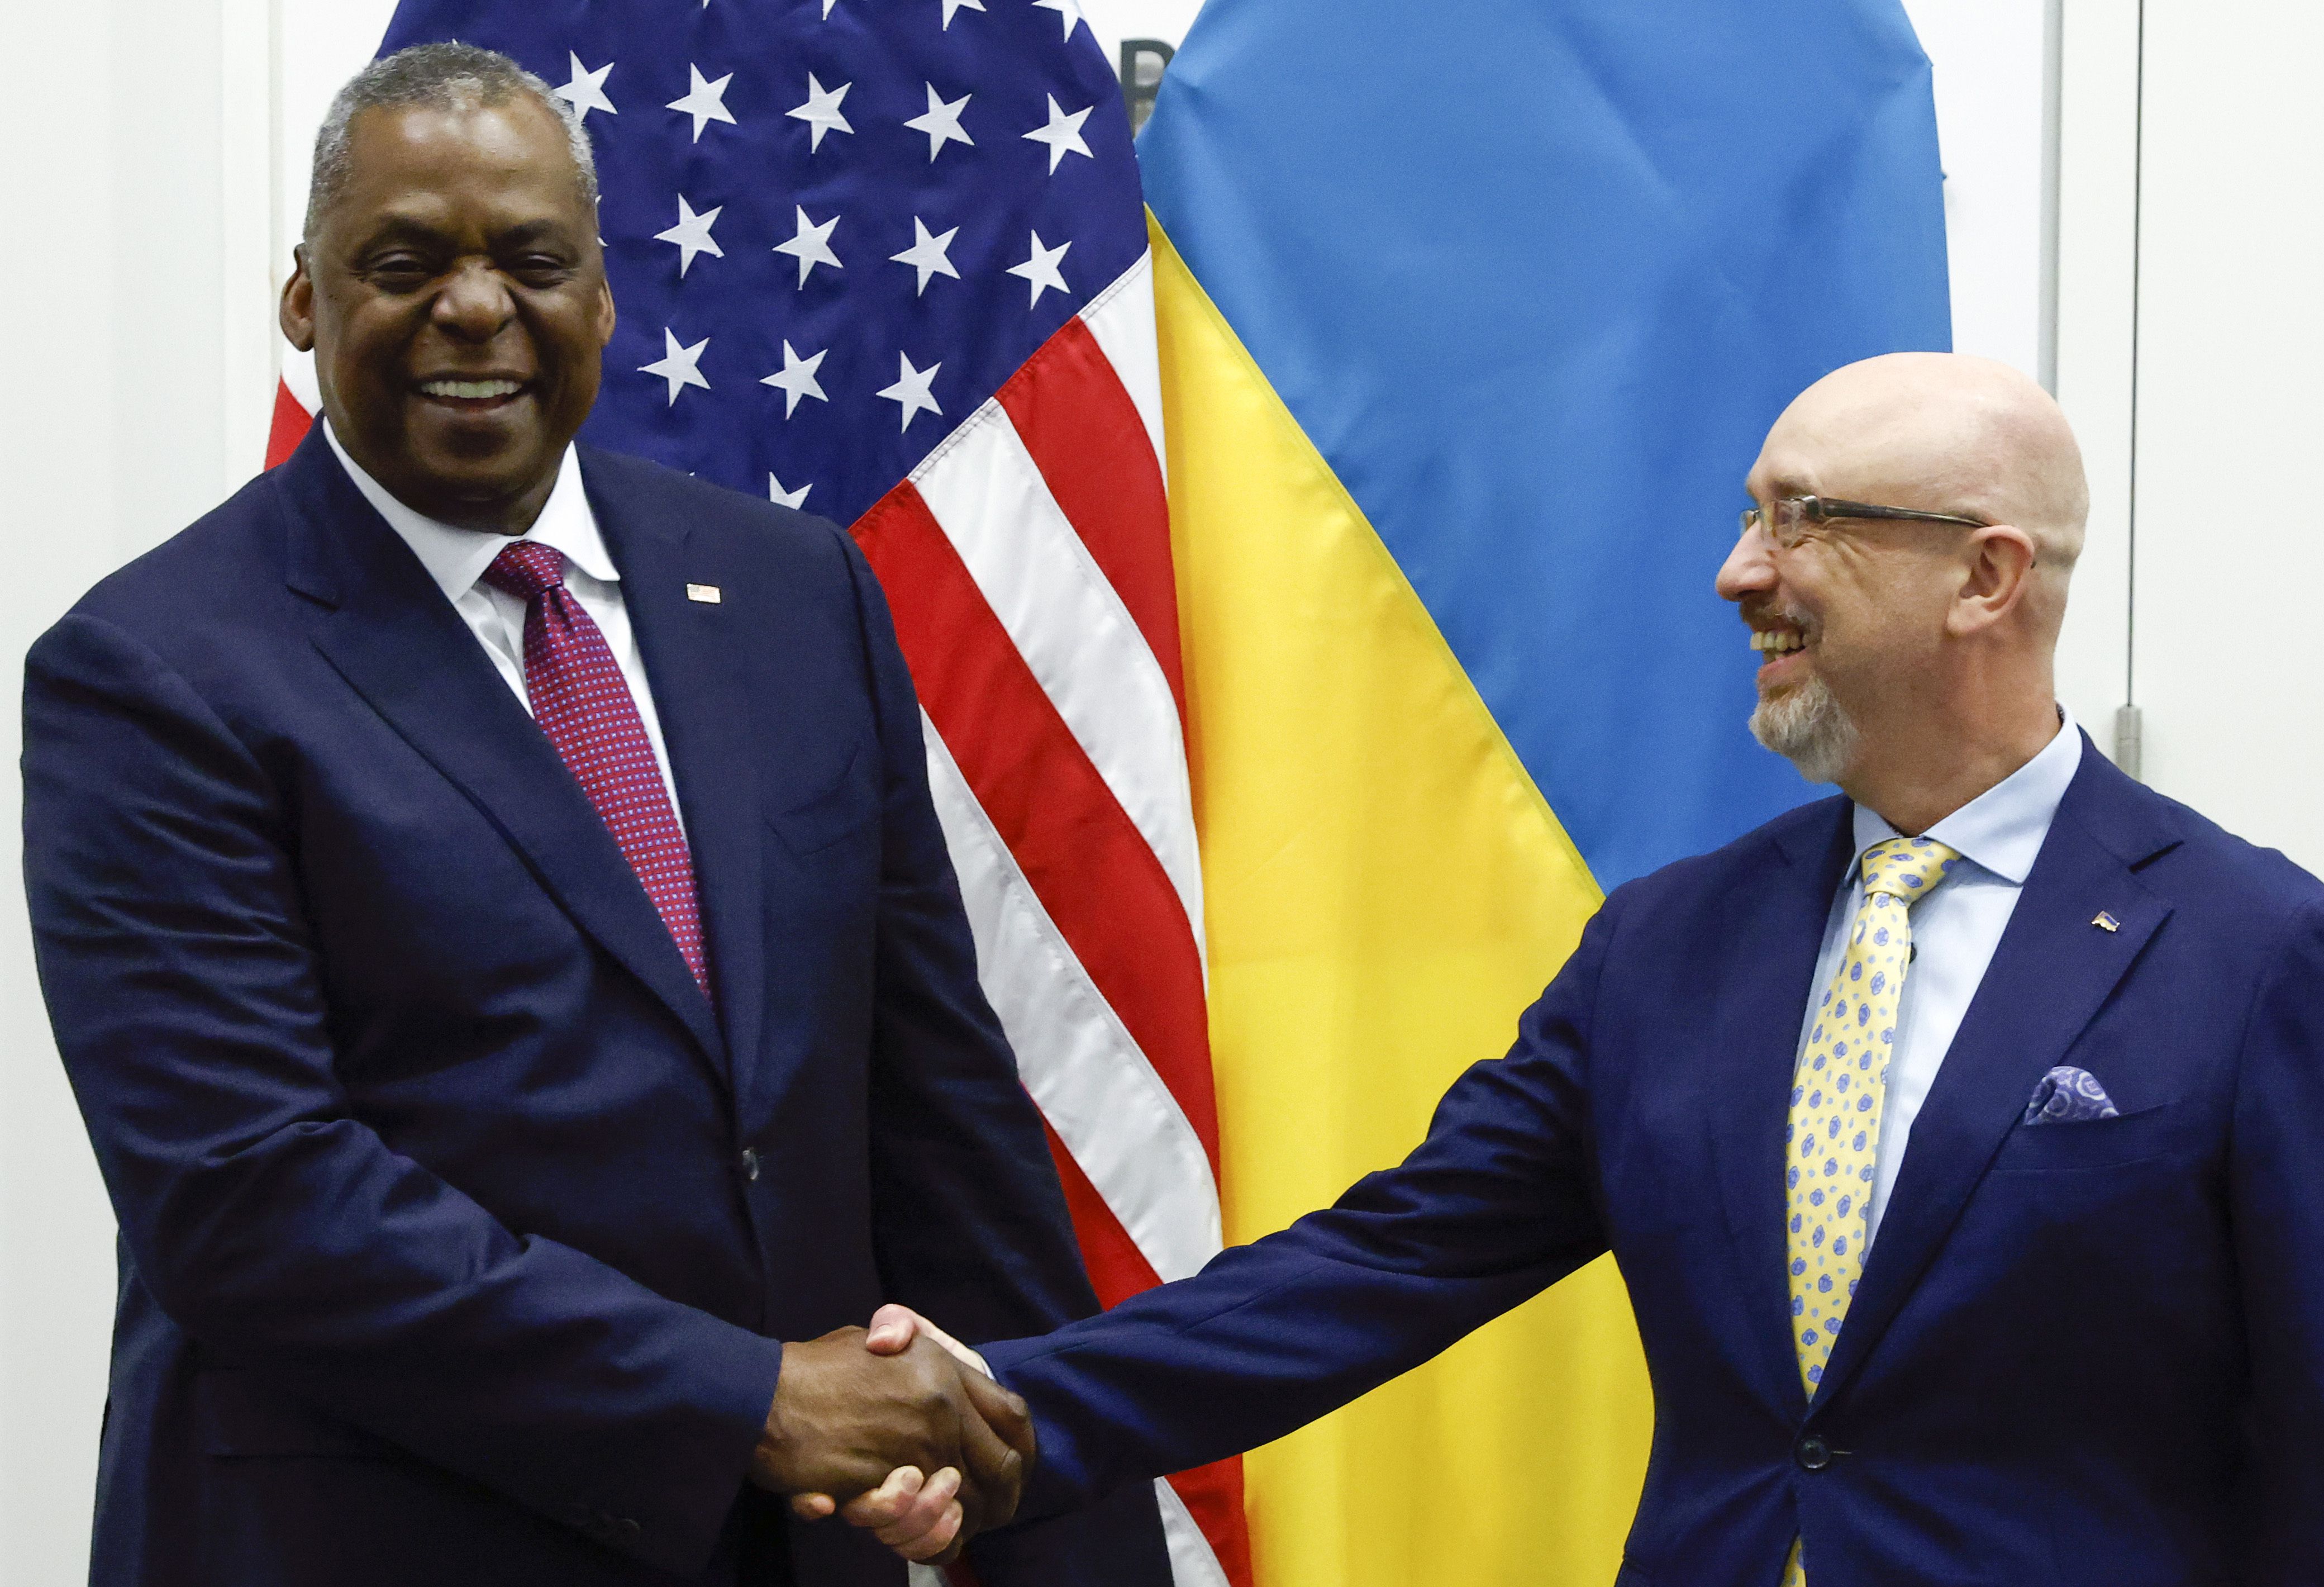 U.S. Defense Secretary Lloyd Austin, left, greets Ukraine's Defense Minister Oleksii Reznikov ahead of a NATO defence ministers' meeting at NATO headquarters in Brussels, Wednesday, June 15, 2022. NATO defense ministers, attending a two-day meeting starting Wednesday, will discuss beefing up weapons supplies to Ukraine, and Sweden and Finland's applications to join the transatlantic military alliance. (Yves Herman, Pool Photo via AP)